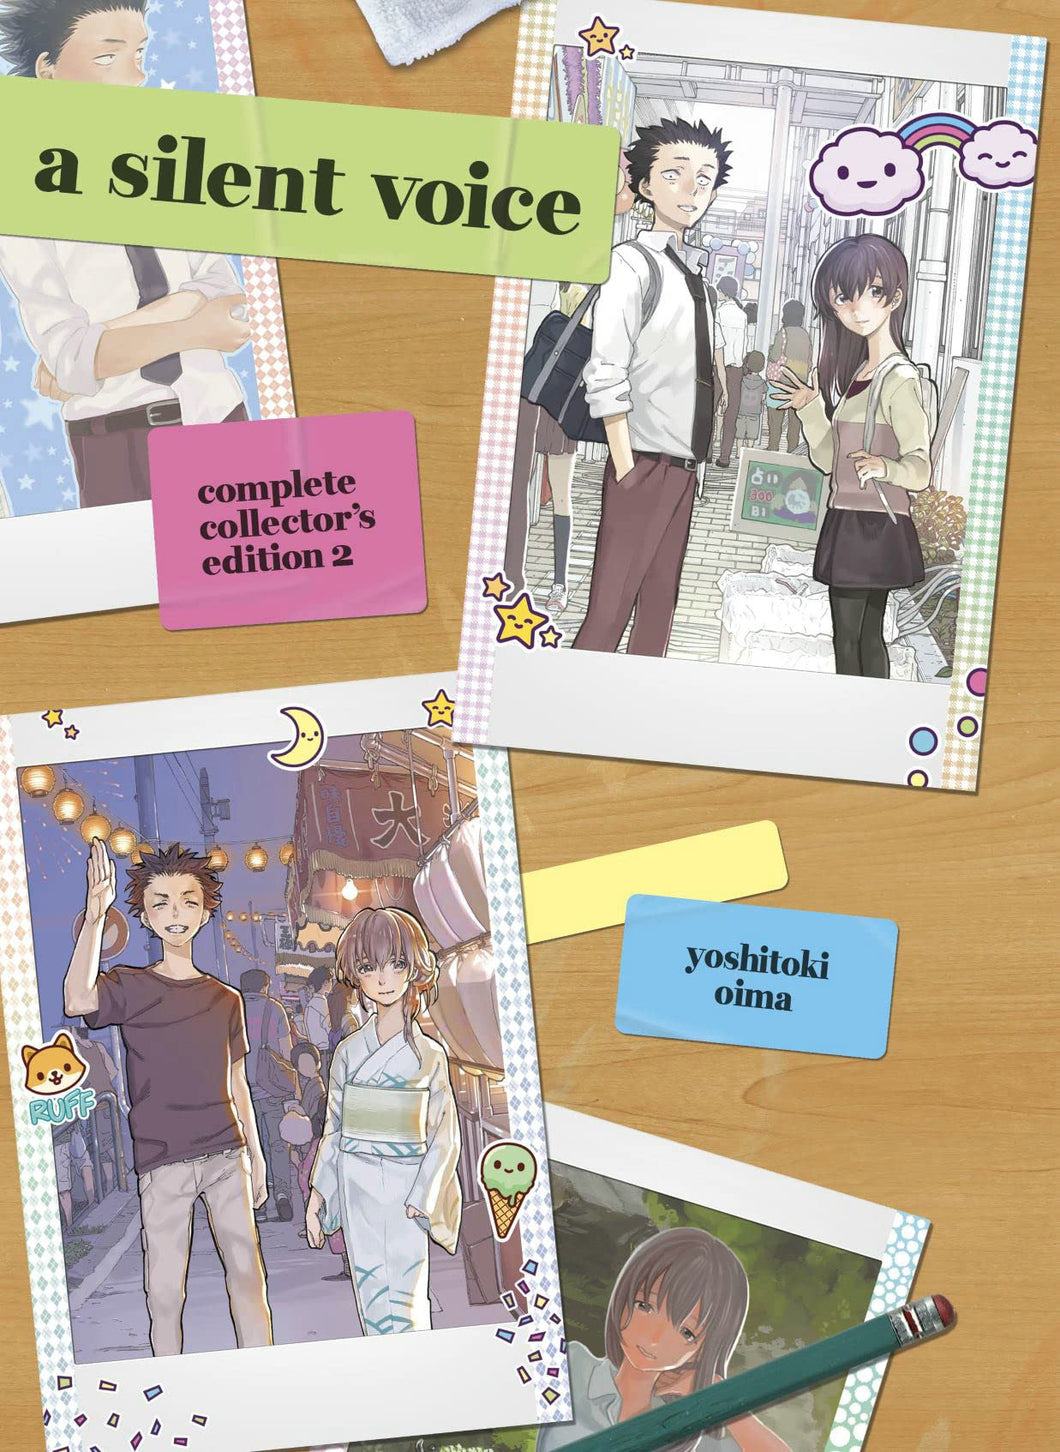 A Silent Voice Complete Collector's Edition Volume 2